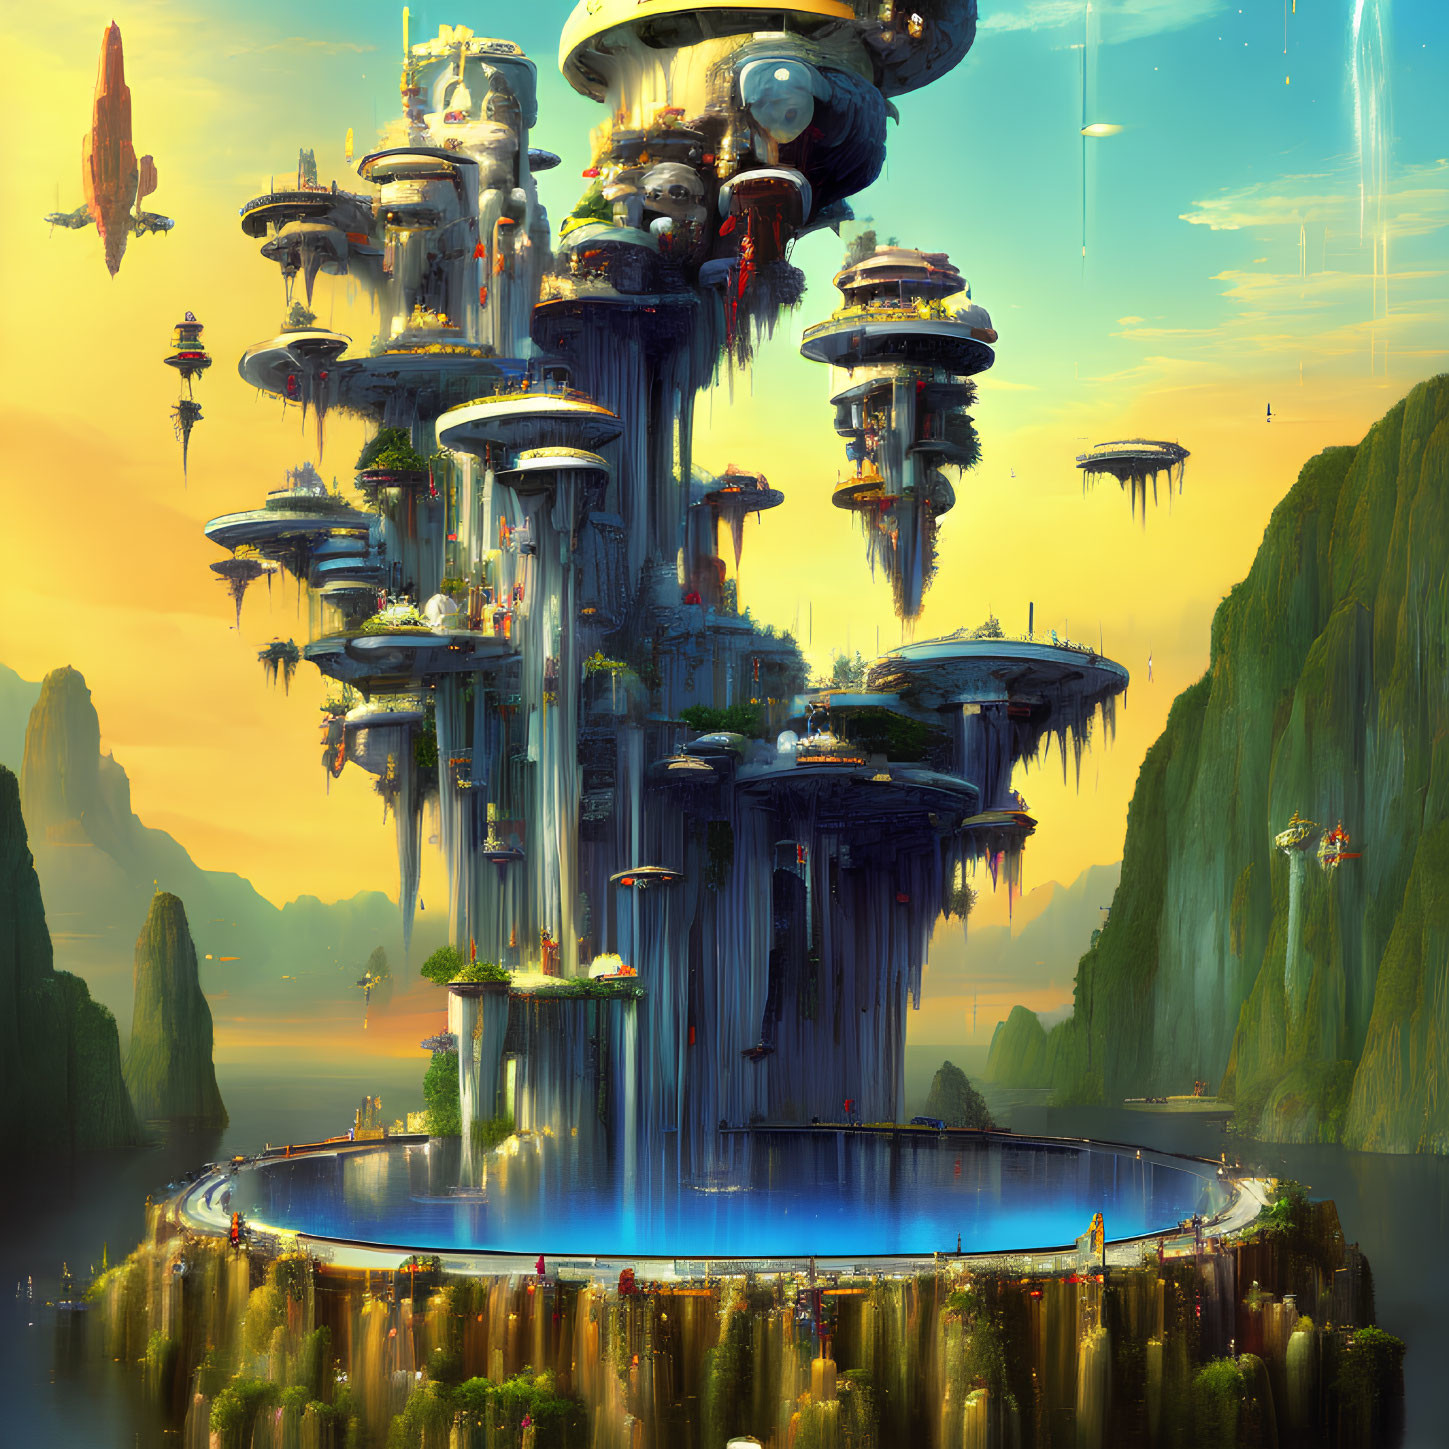 Futuristic cityscape with towering structures and waterfalls by serene lake